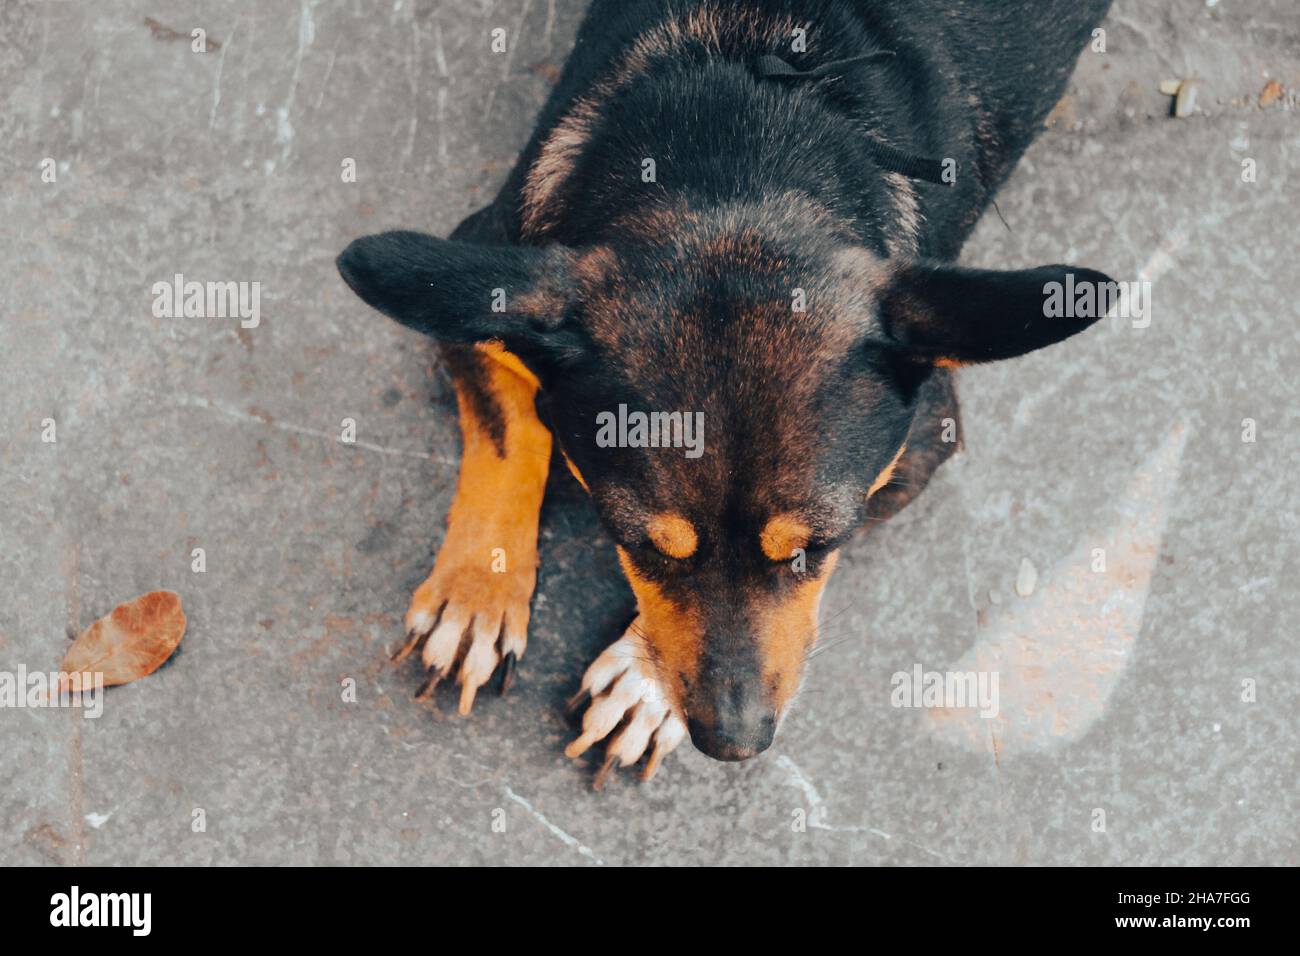 Closeup top view of a German Jagdterrier dog lying on the asphalt ground outdoors Stock Photo